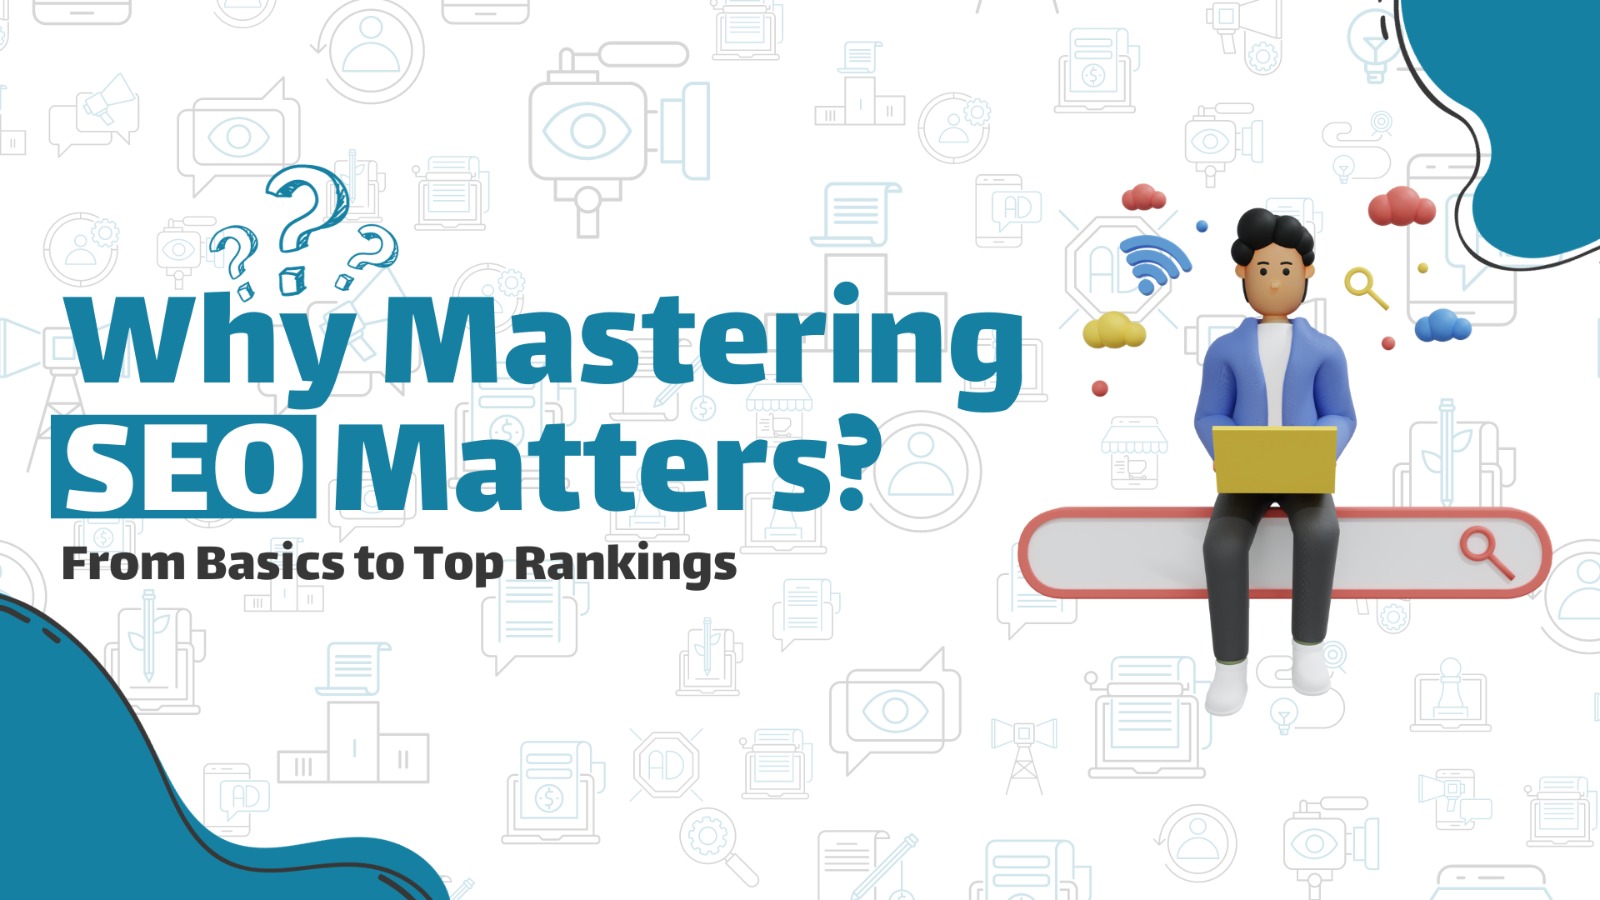 Why Mastering SEO Matters: From Basics to Top Rankings